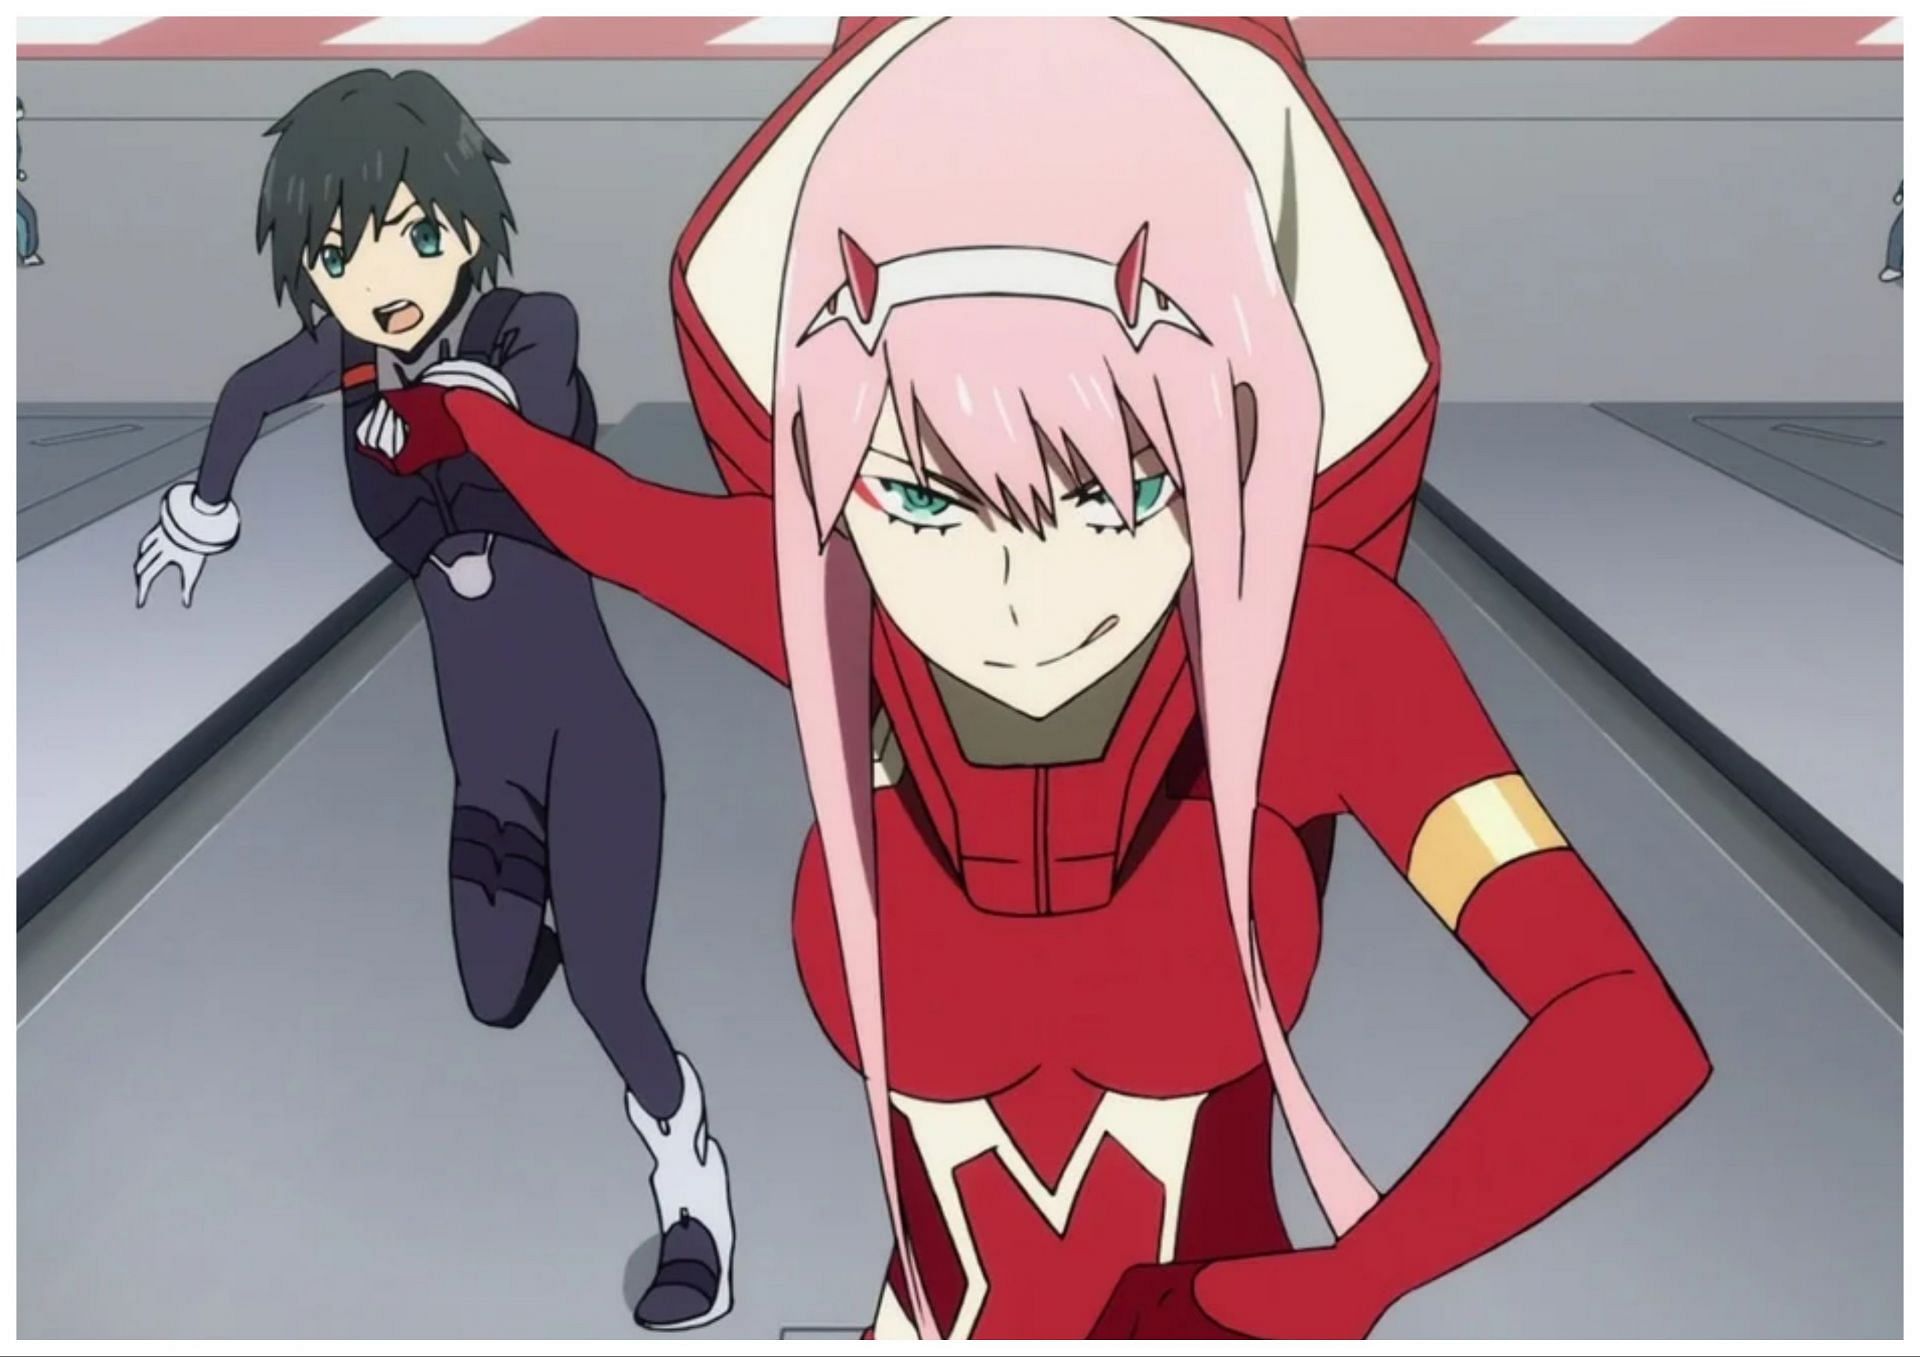 Darling in the FranXX manga – how different is it from the anime